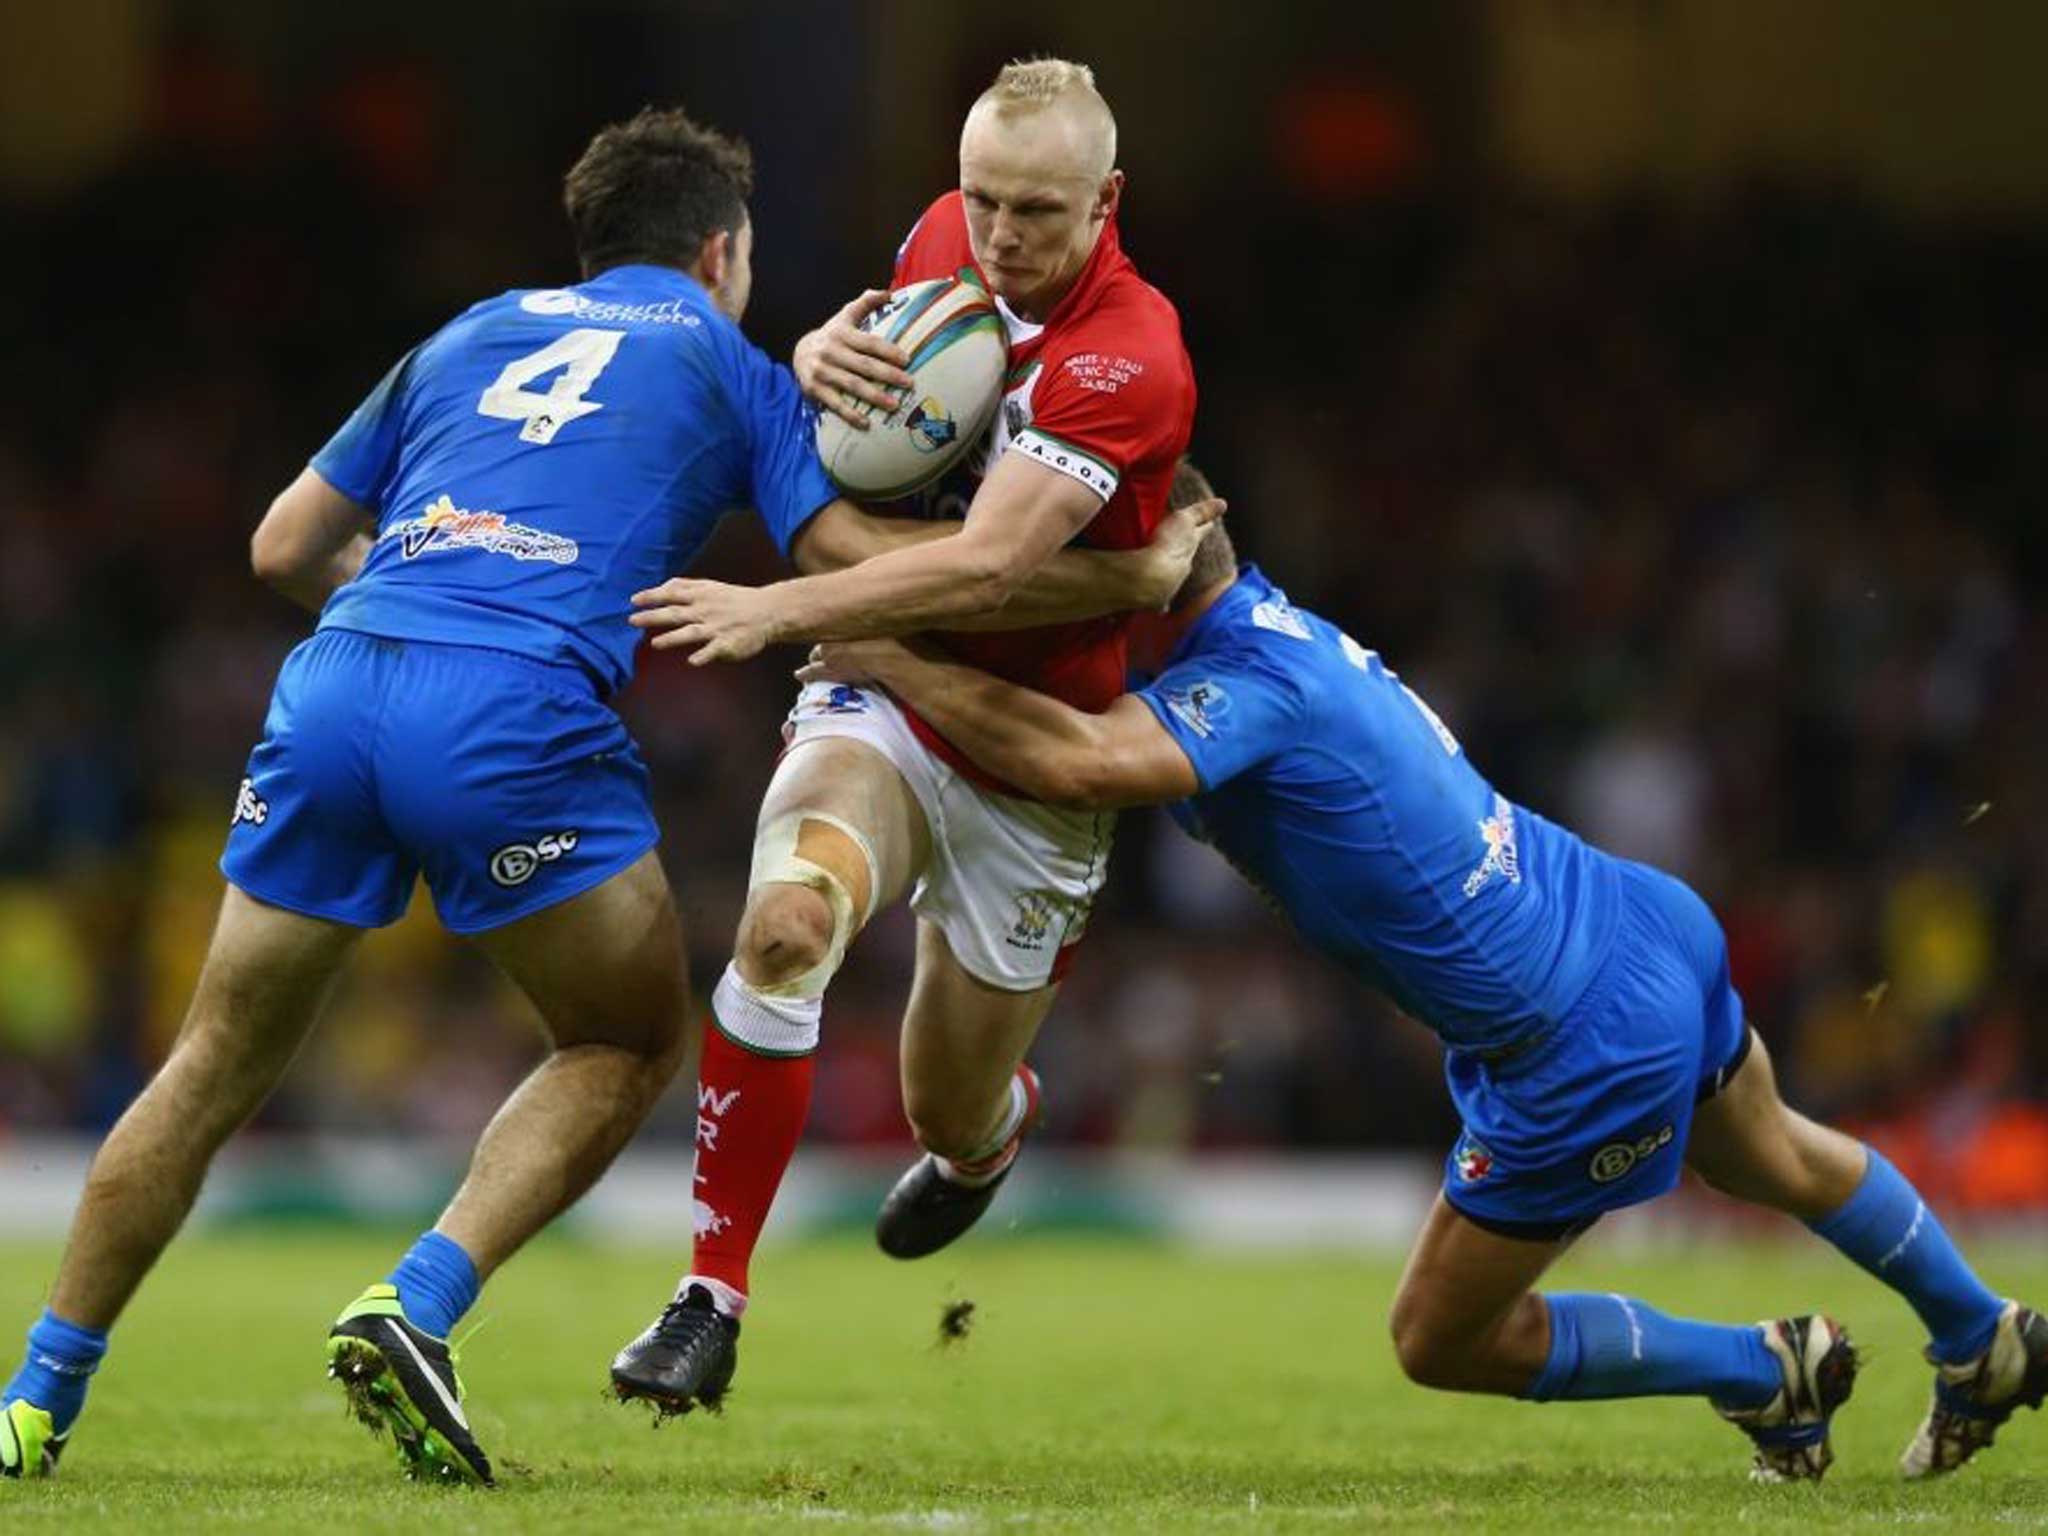 Rhys Evans is tackled by the Italians Ryan Ghietti (R) and Aidan Guerra (L) during the Rugby League World Cup Inter group match 